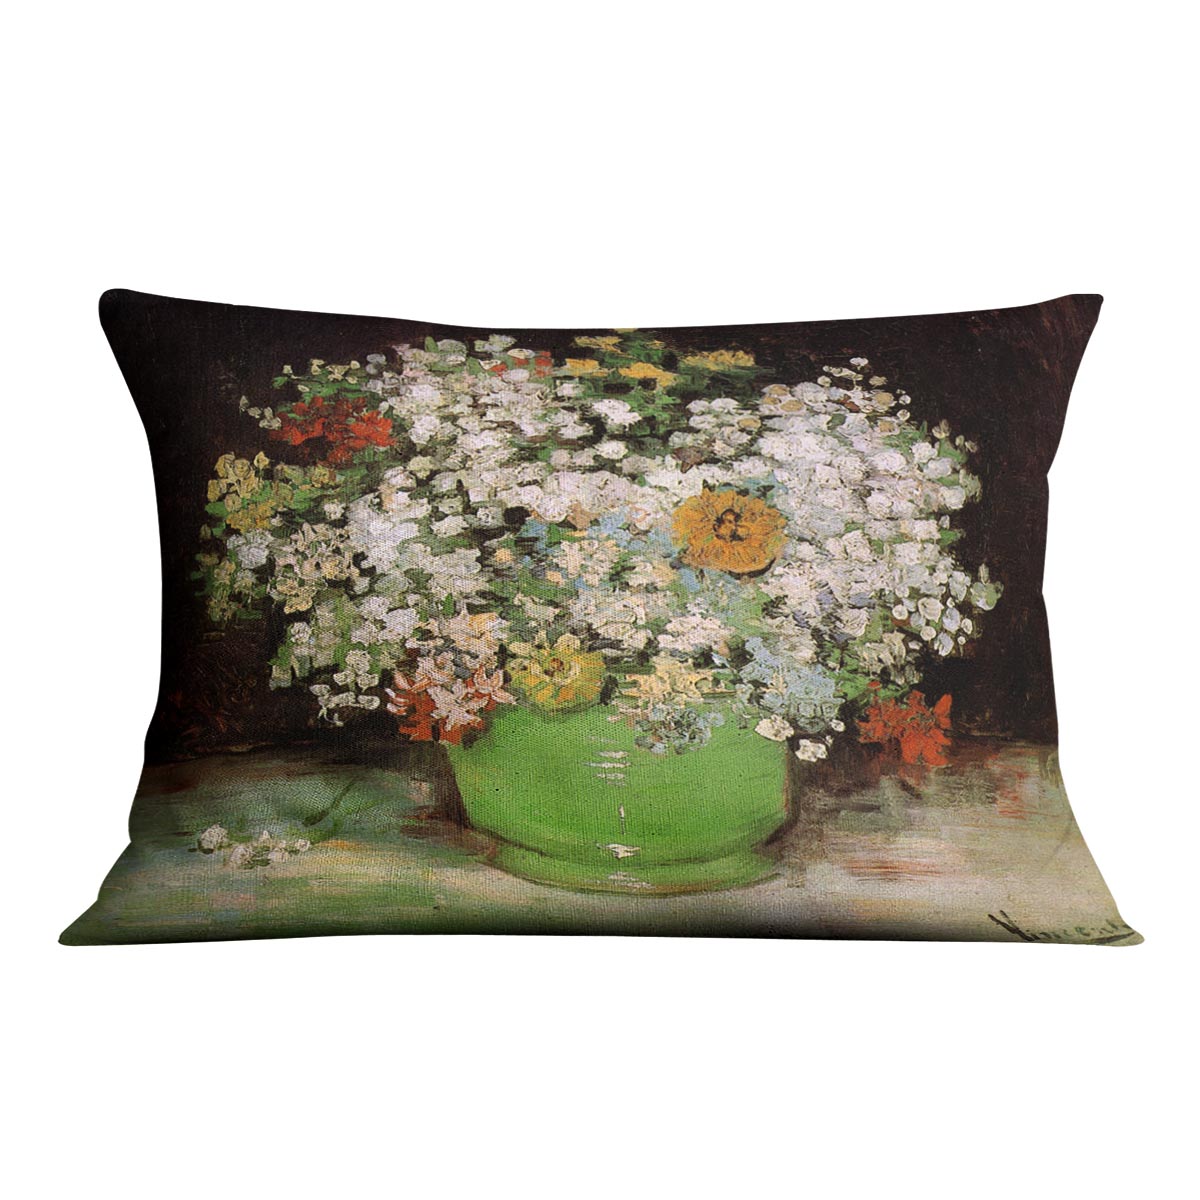 Vase with Zinnias and Other Flowers by Van Gogh Cushion